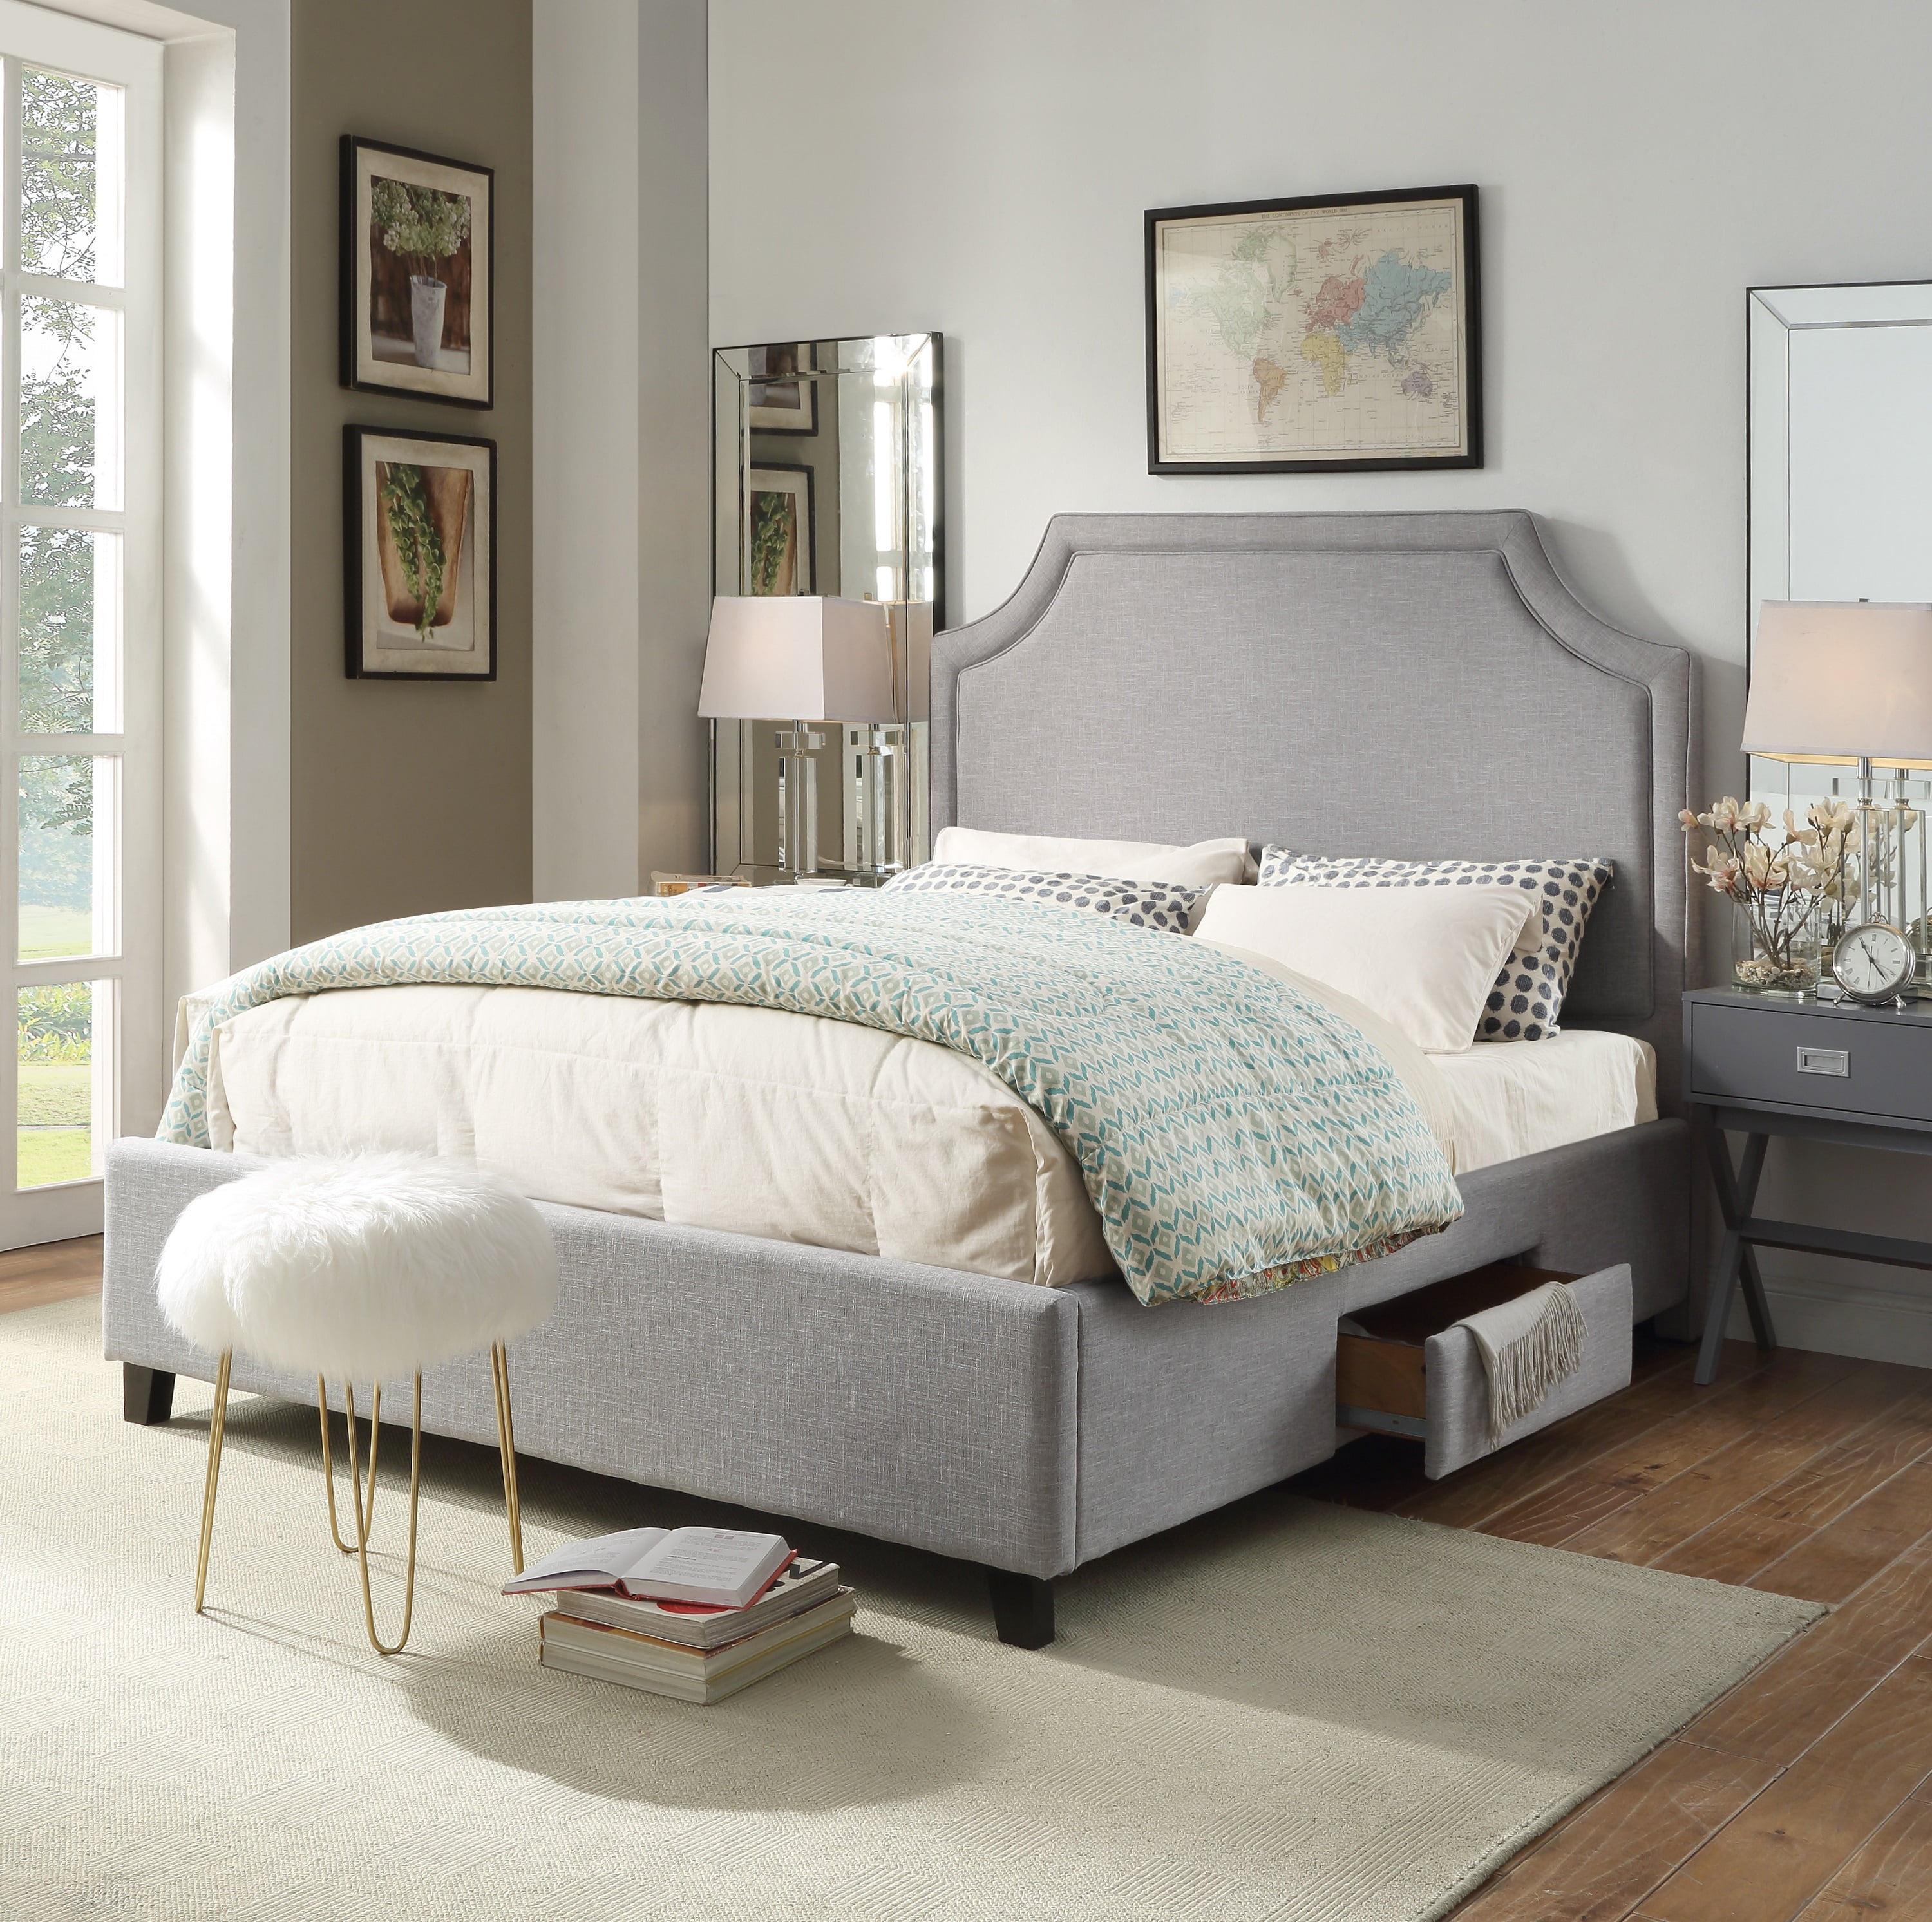 Chic Home Francis Platform Bed Frame With Headboard And Hidden Storage Drawers Linen Upholstered 